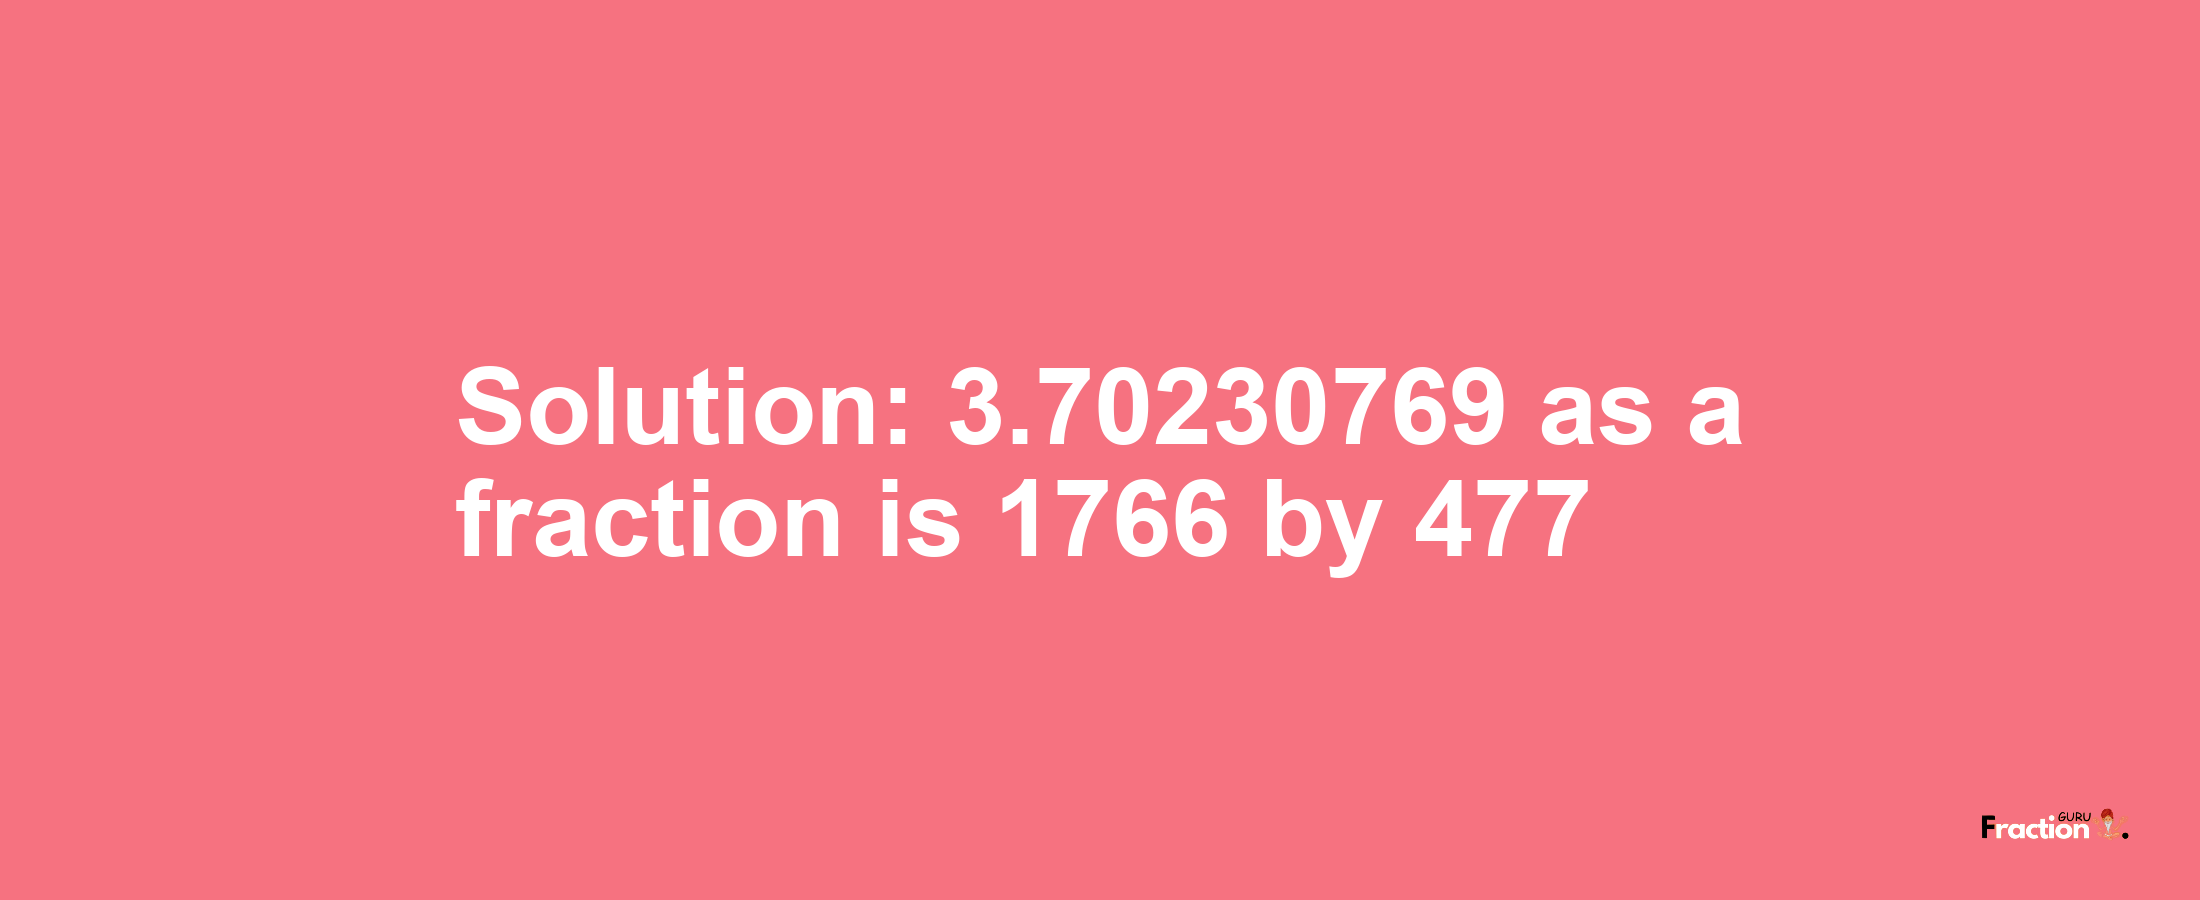 Solution:3.70230769 as a fraction is 1766/477